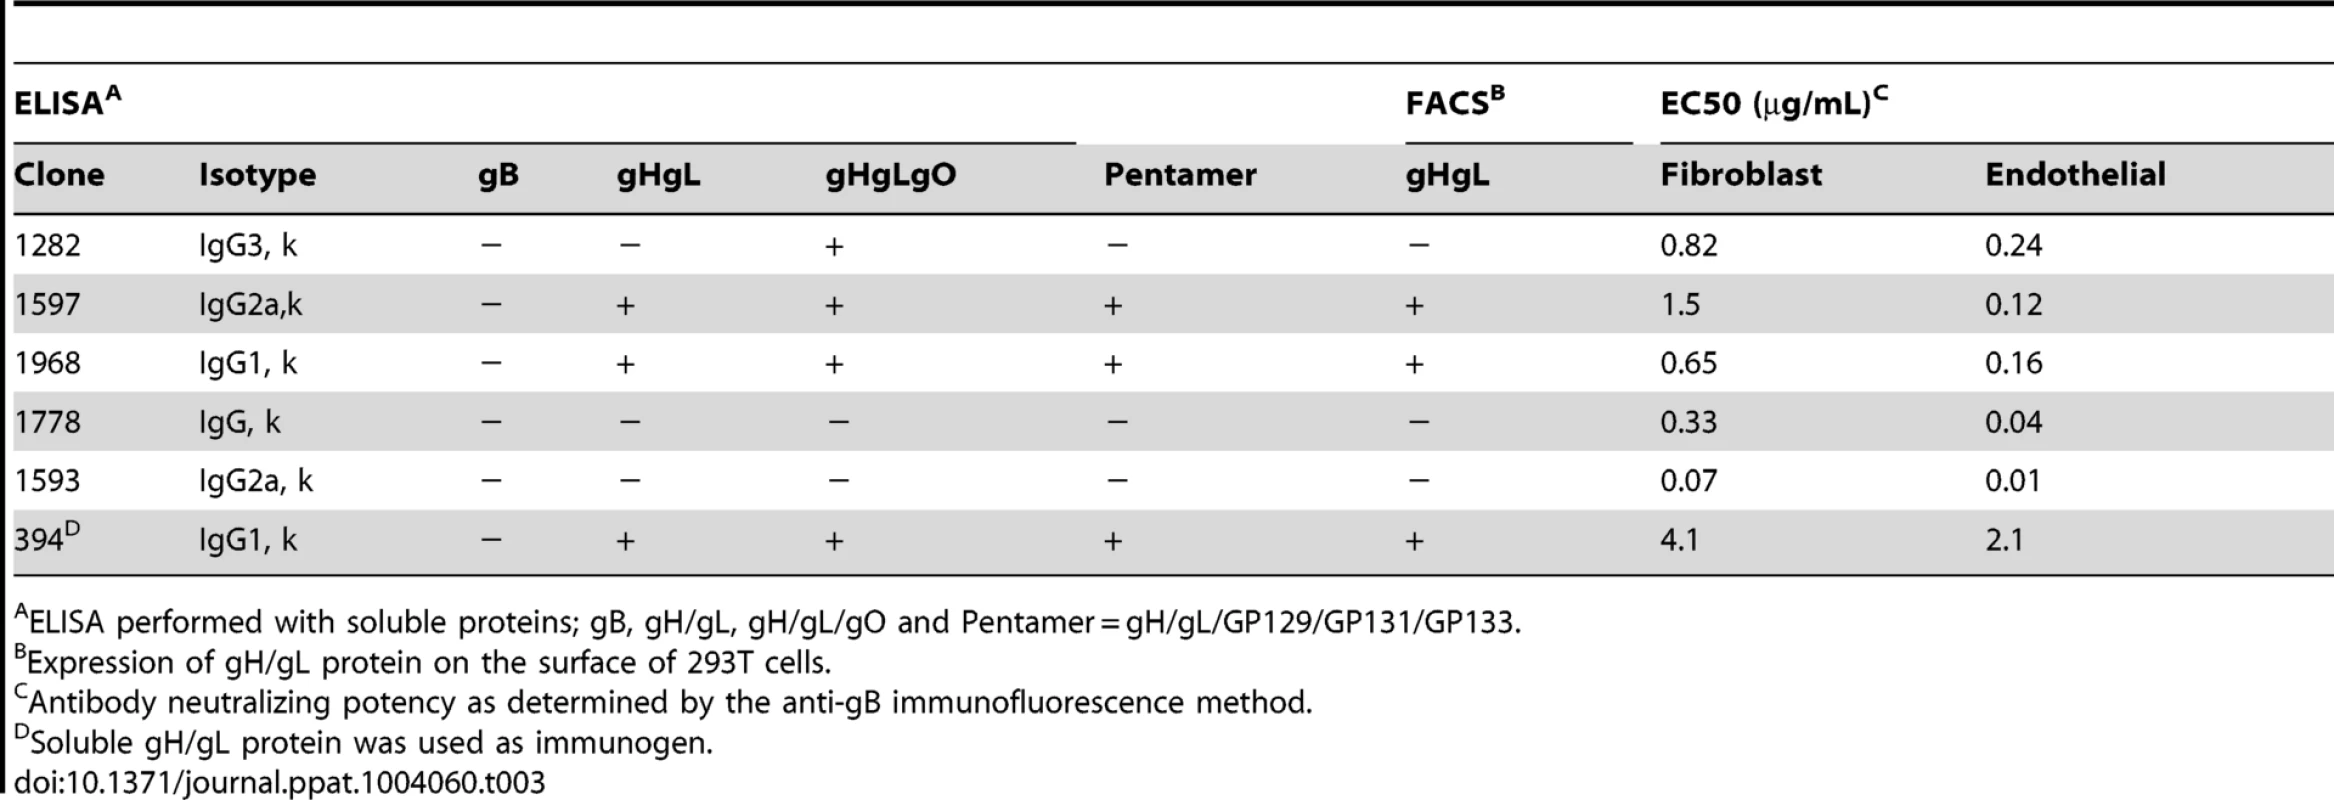 Characterization of mouse monoclonal antibodies against GPCMV.